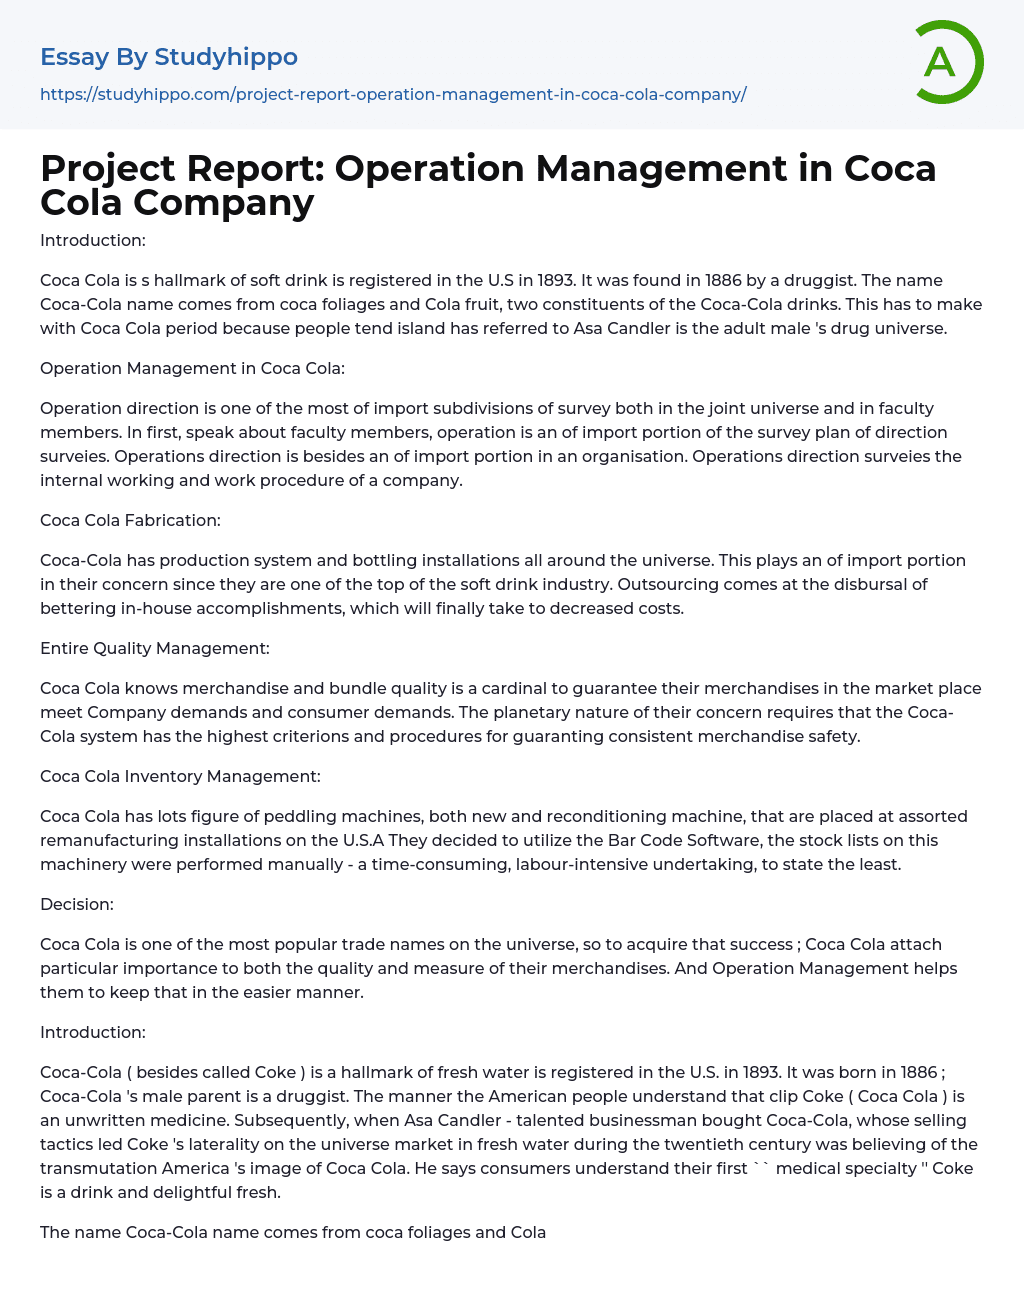 Project Report: Operation Management in Coca Cola Company Essay Example